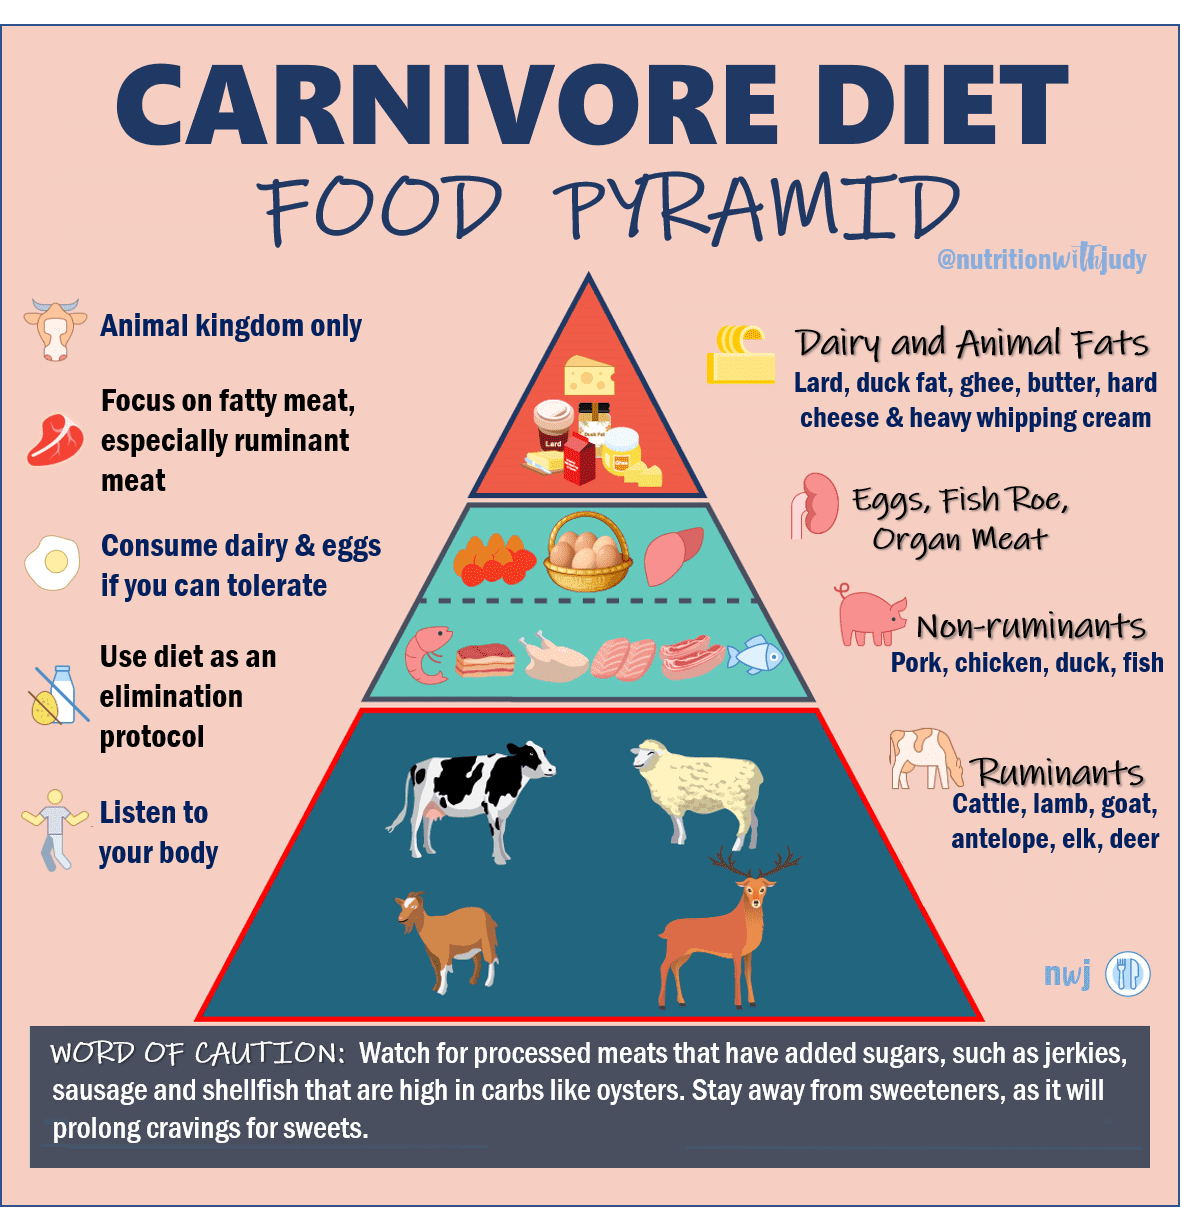 The Nutritionist’s Guide to the Carnivore Diet: A Beginner's Guide - Nutrition with Judy1182 x 1207